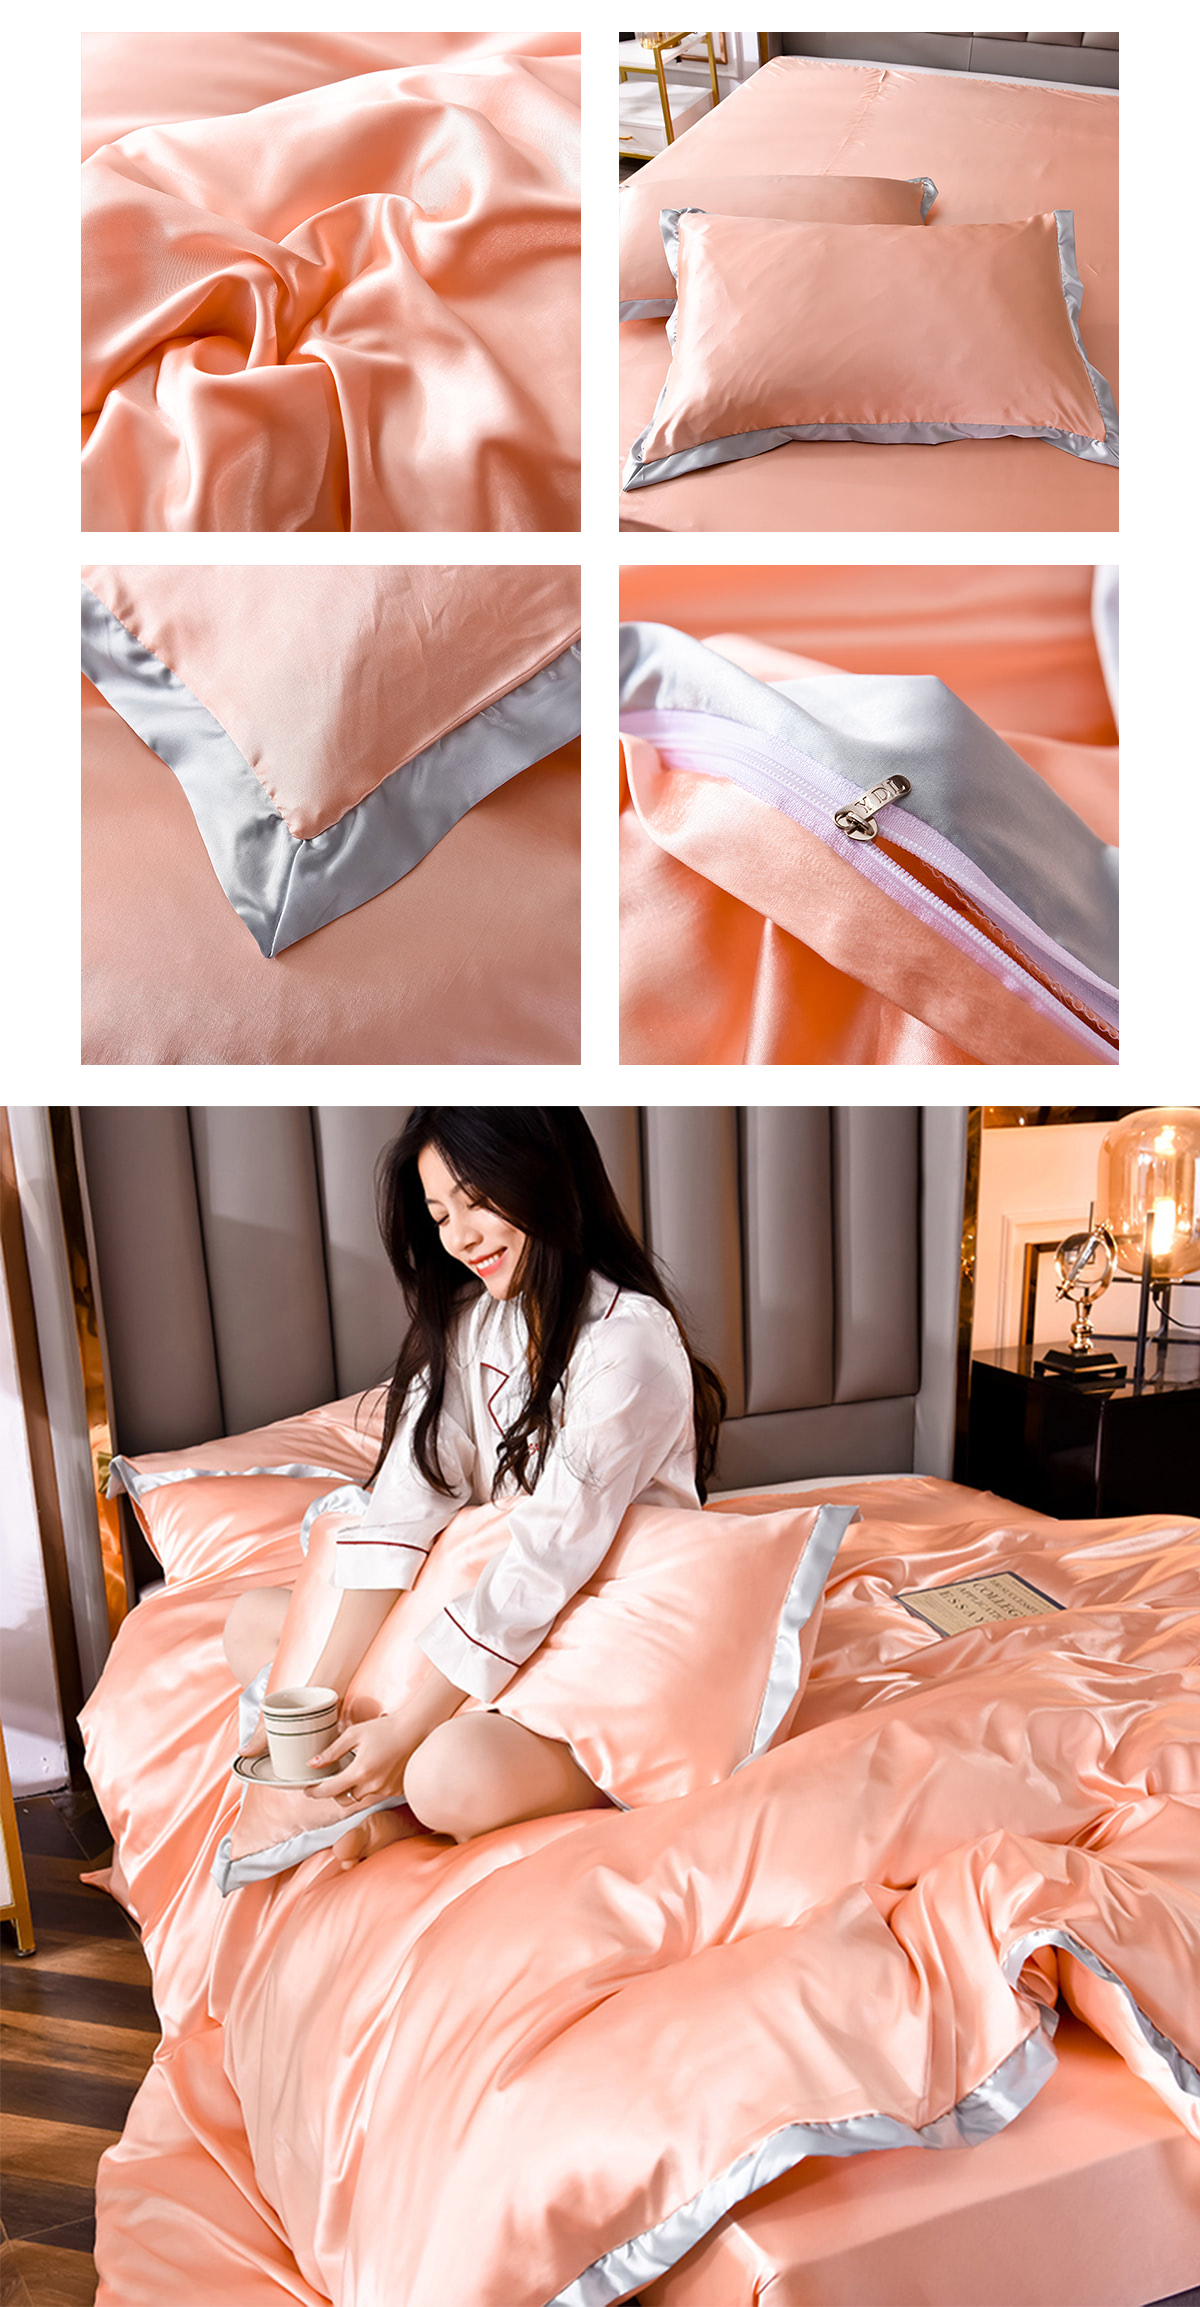 Fresh-and-Soft-Comfortable-Satin-Bed-Cover-Sheet-Set47.jpg